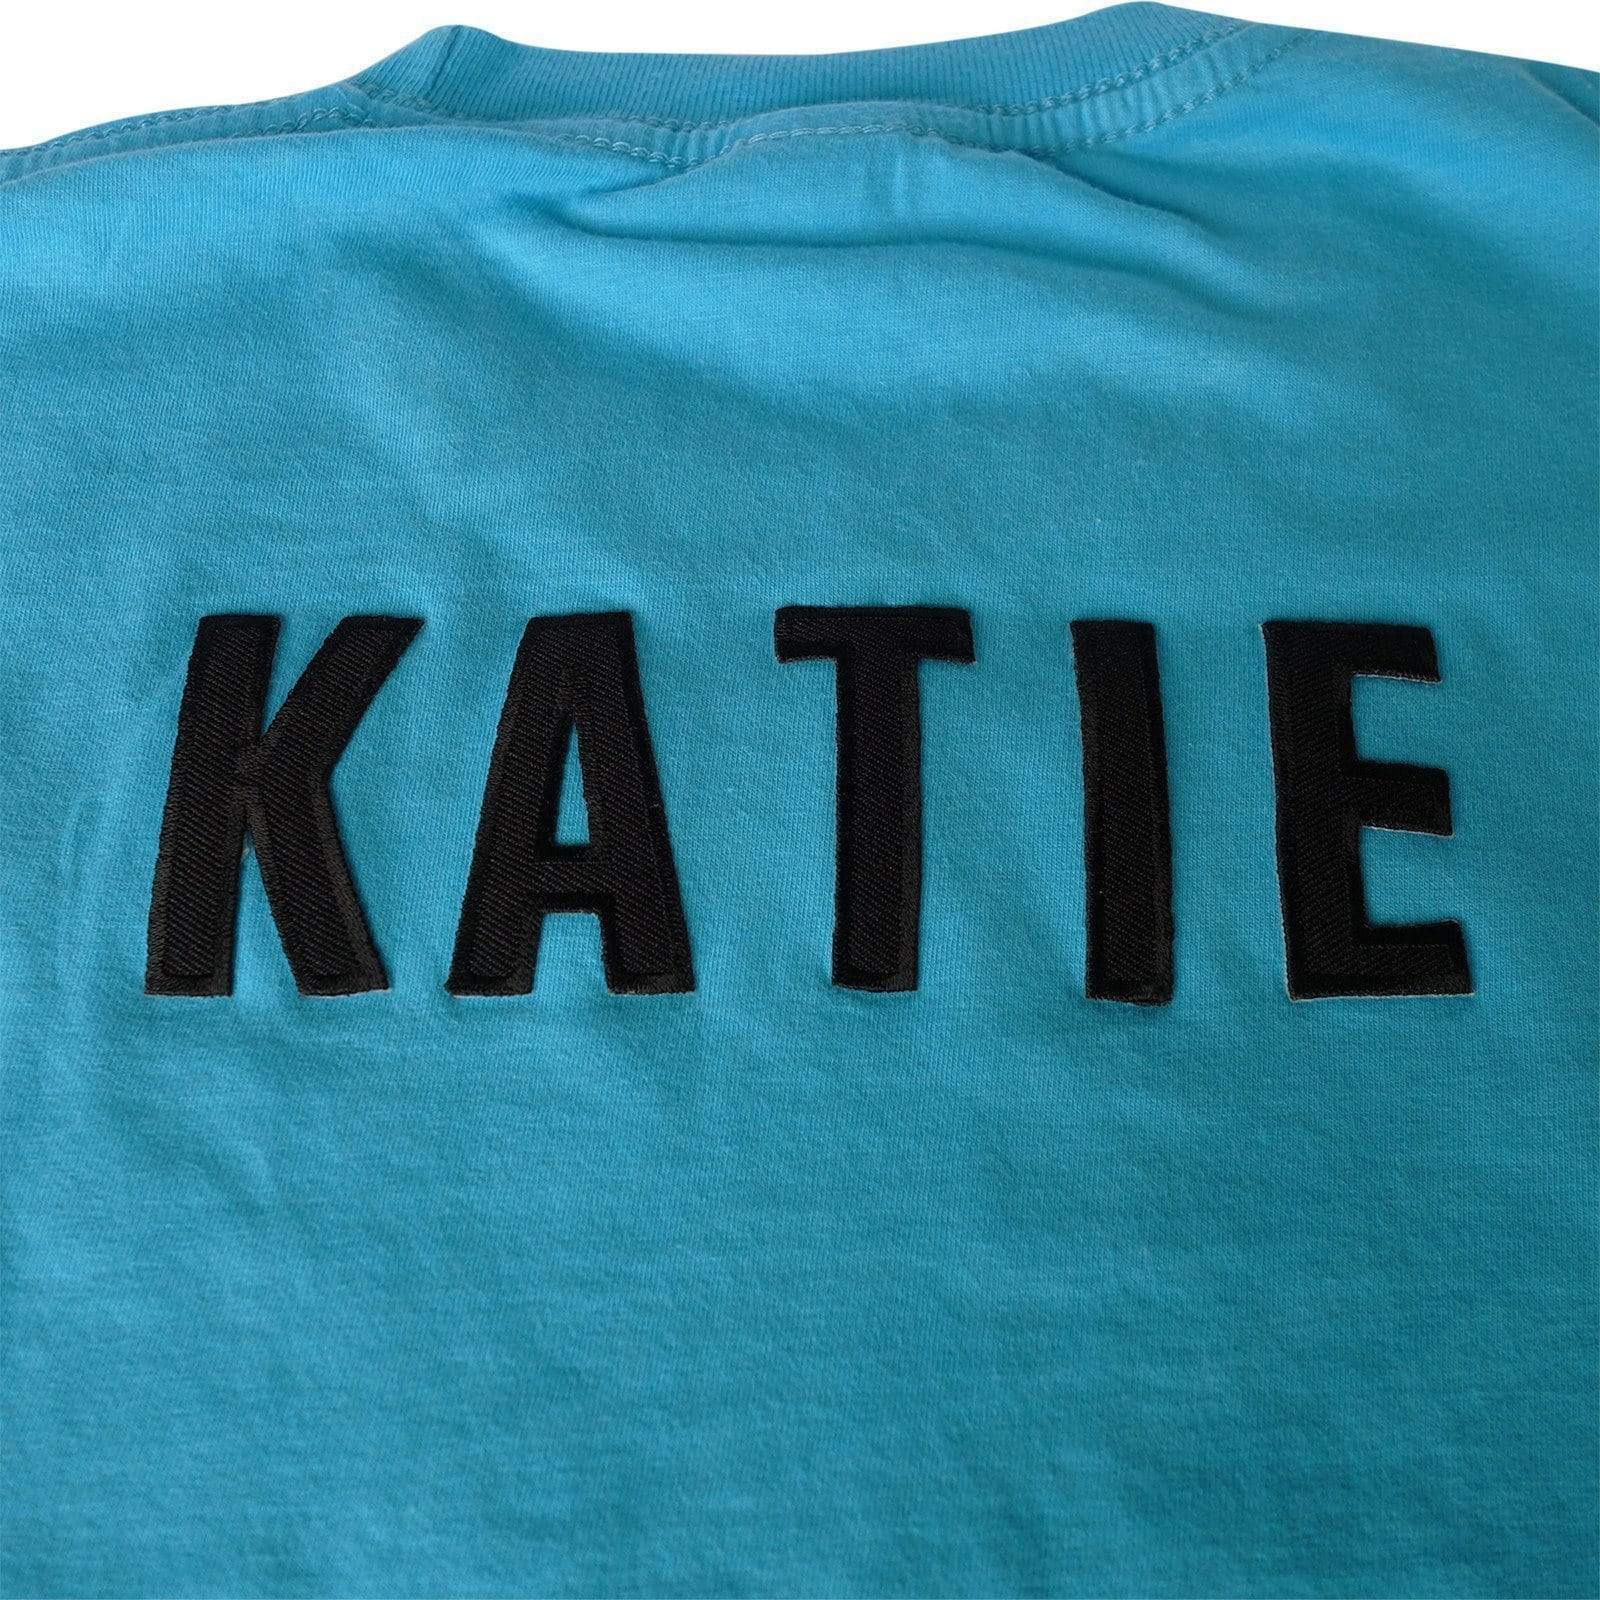 KATIE Name Patch Embroidered Letters Tag Label Badge Iron Sew On Clothes T Shirt